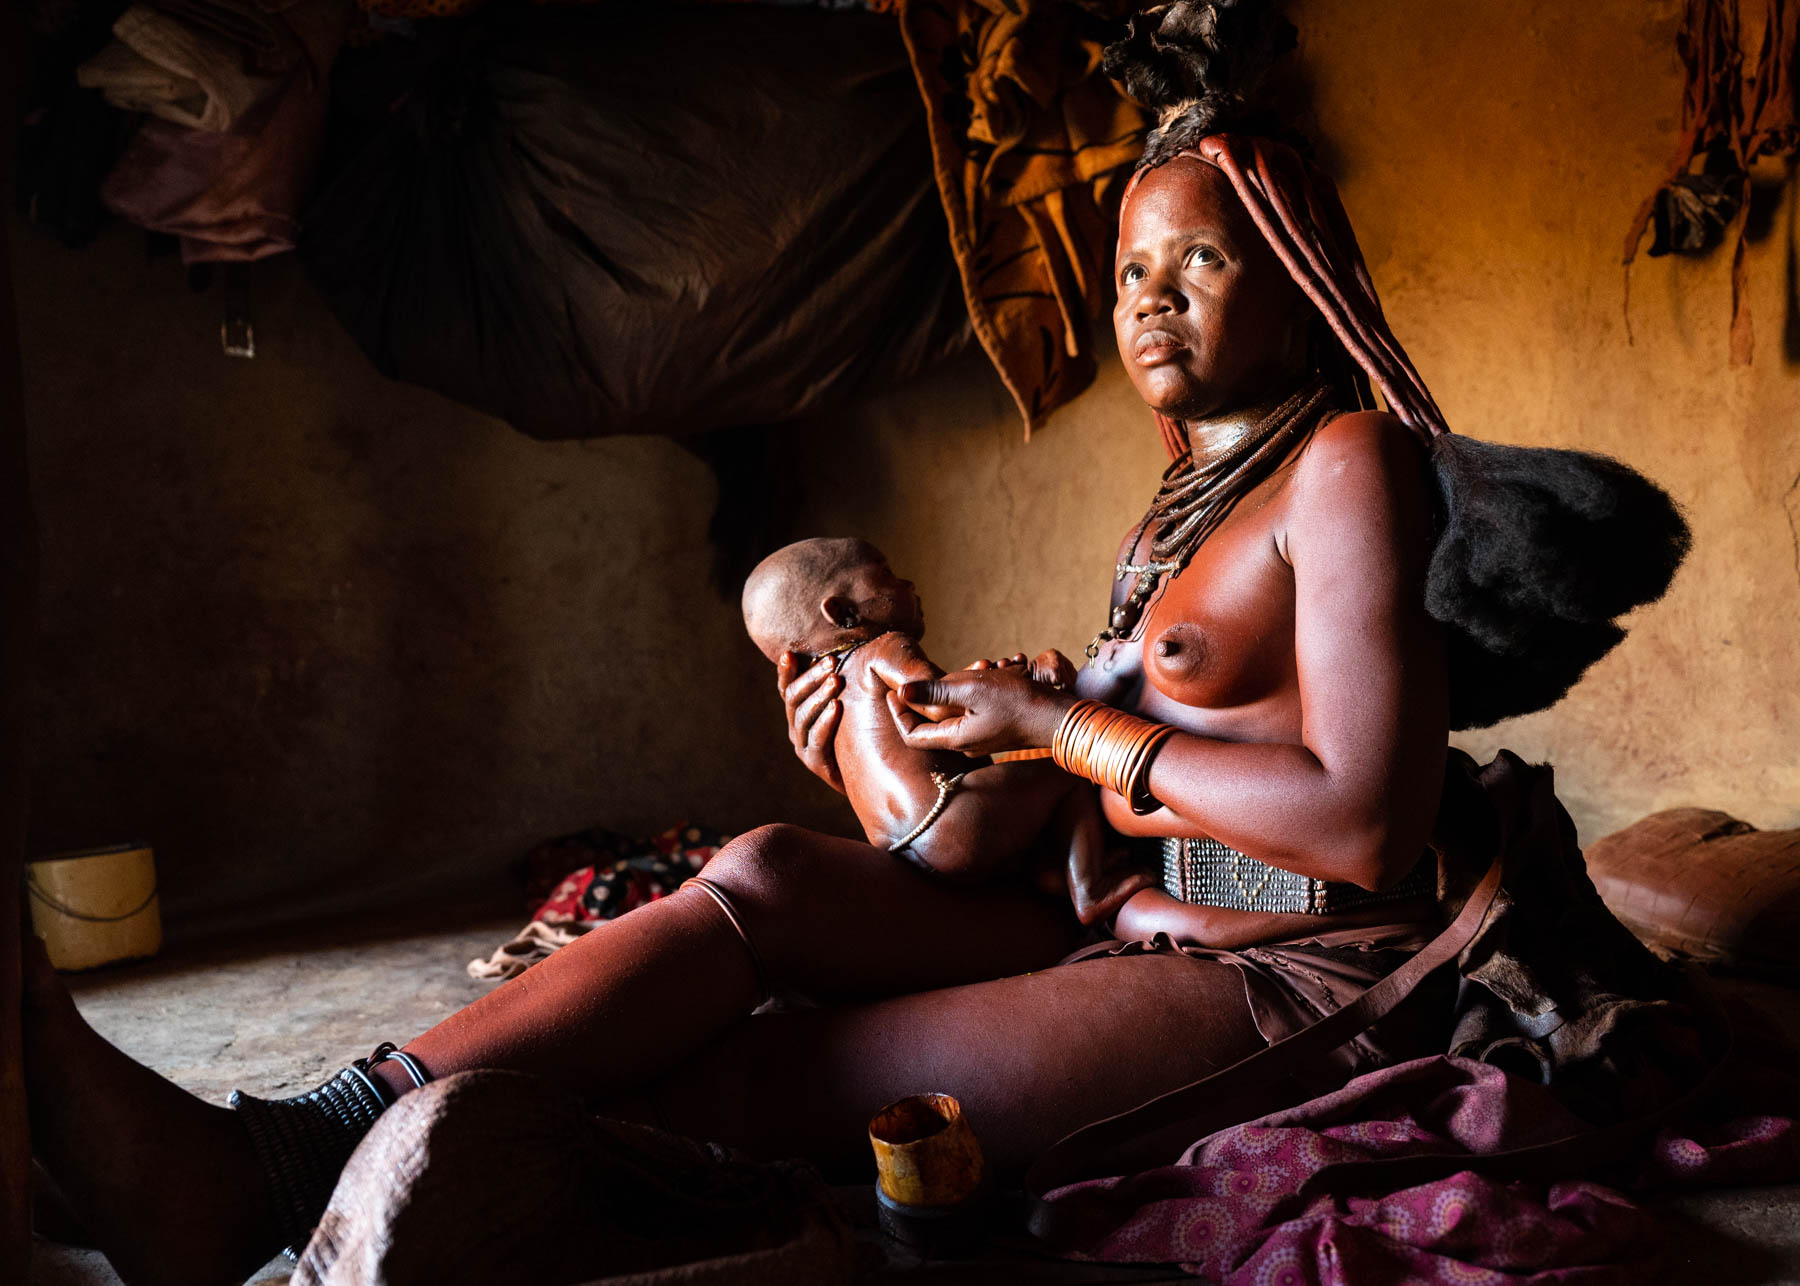 Meeting the Himba people of Namibia